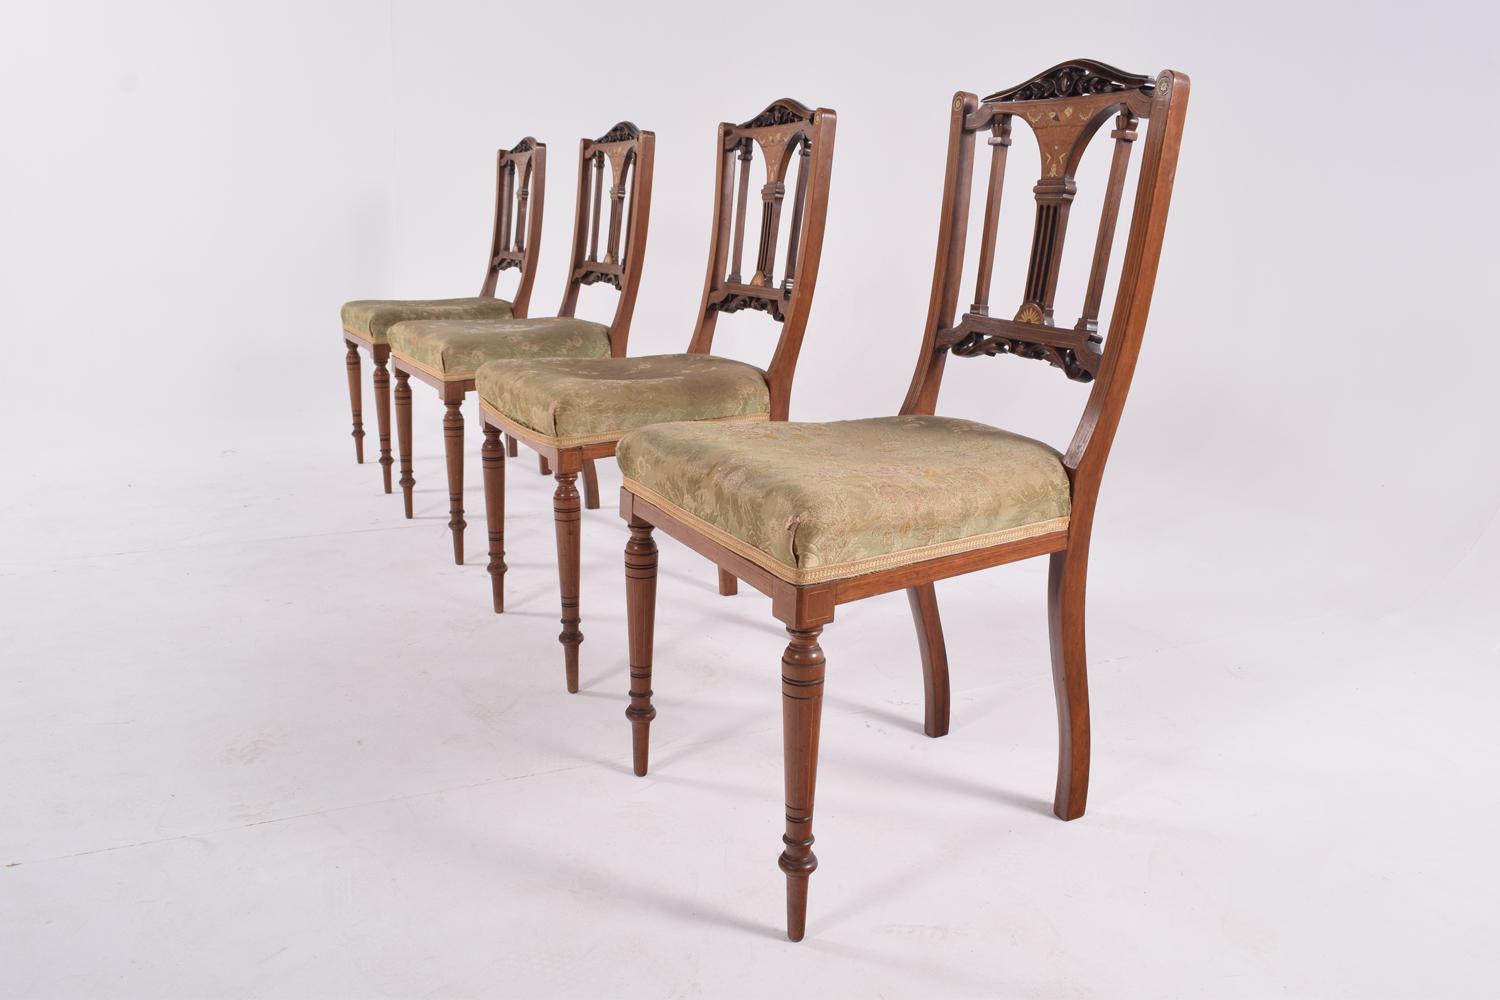 This set of 4 Edwardian rosewood dining chairs features a lovely inlaid top rail. The reupholstered chairs are standing on turned legs to the front and out-swept back legs.